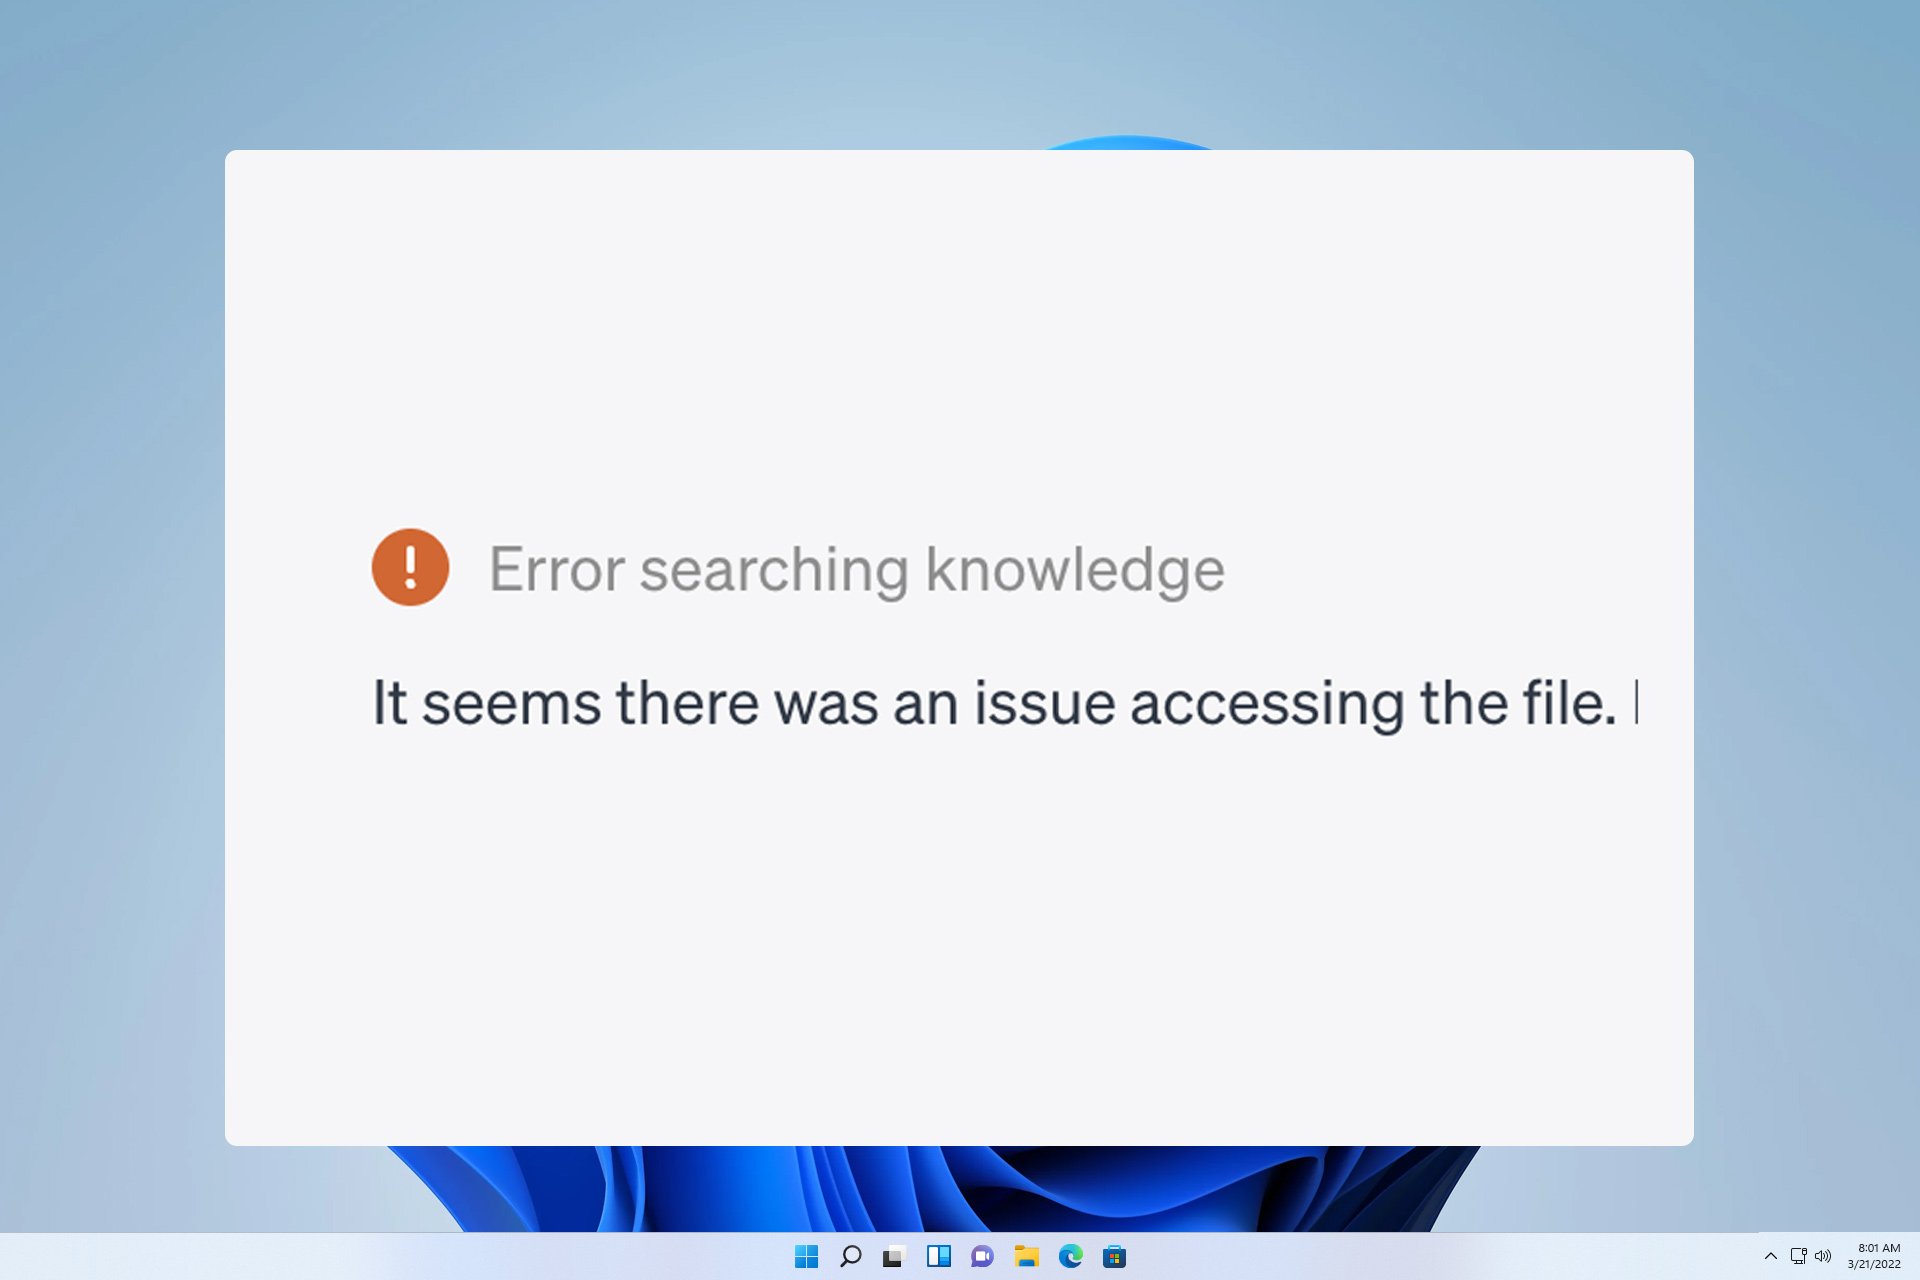 chatgpt error searching knowledge